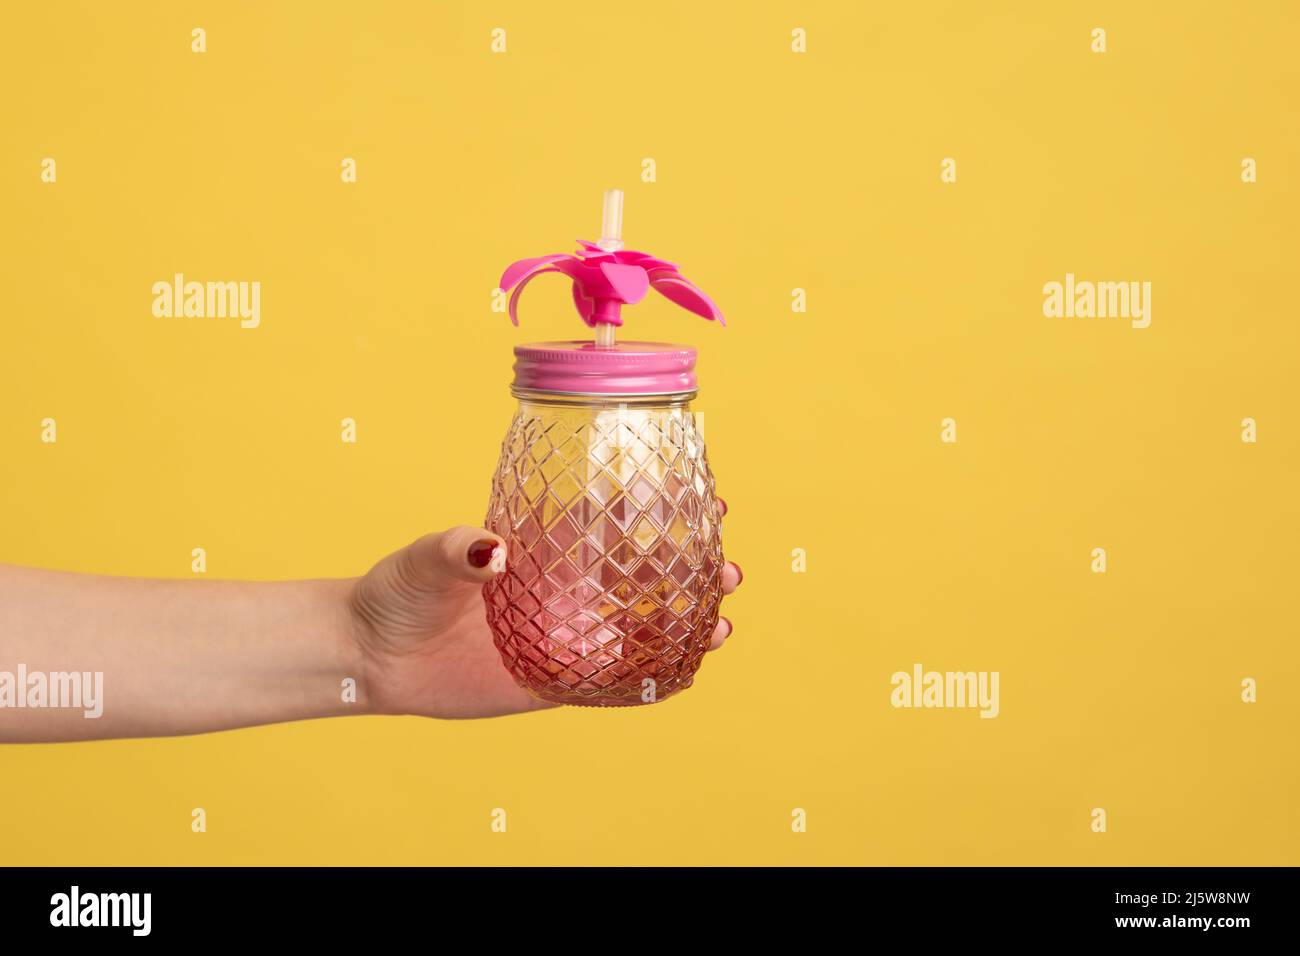 Closeup side view shot of woman hand holding pink glass jar mug with straw for cocktail or smoothie. Indoor studio shot isolated on yellow background. Stock Photo